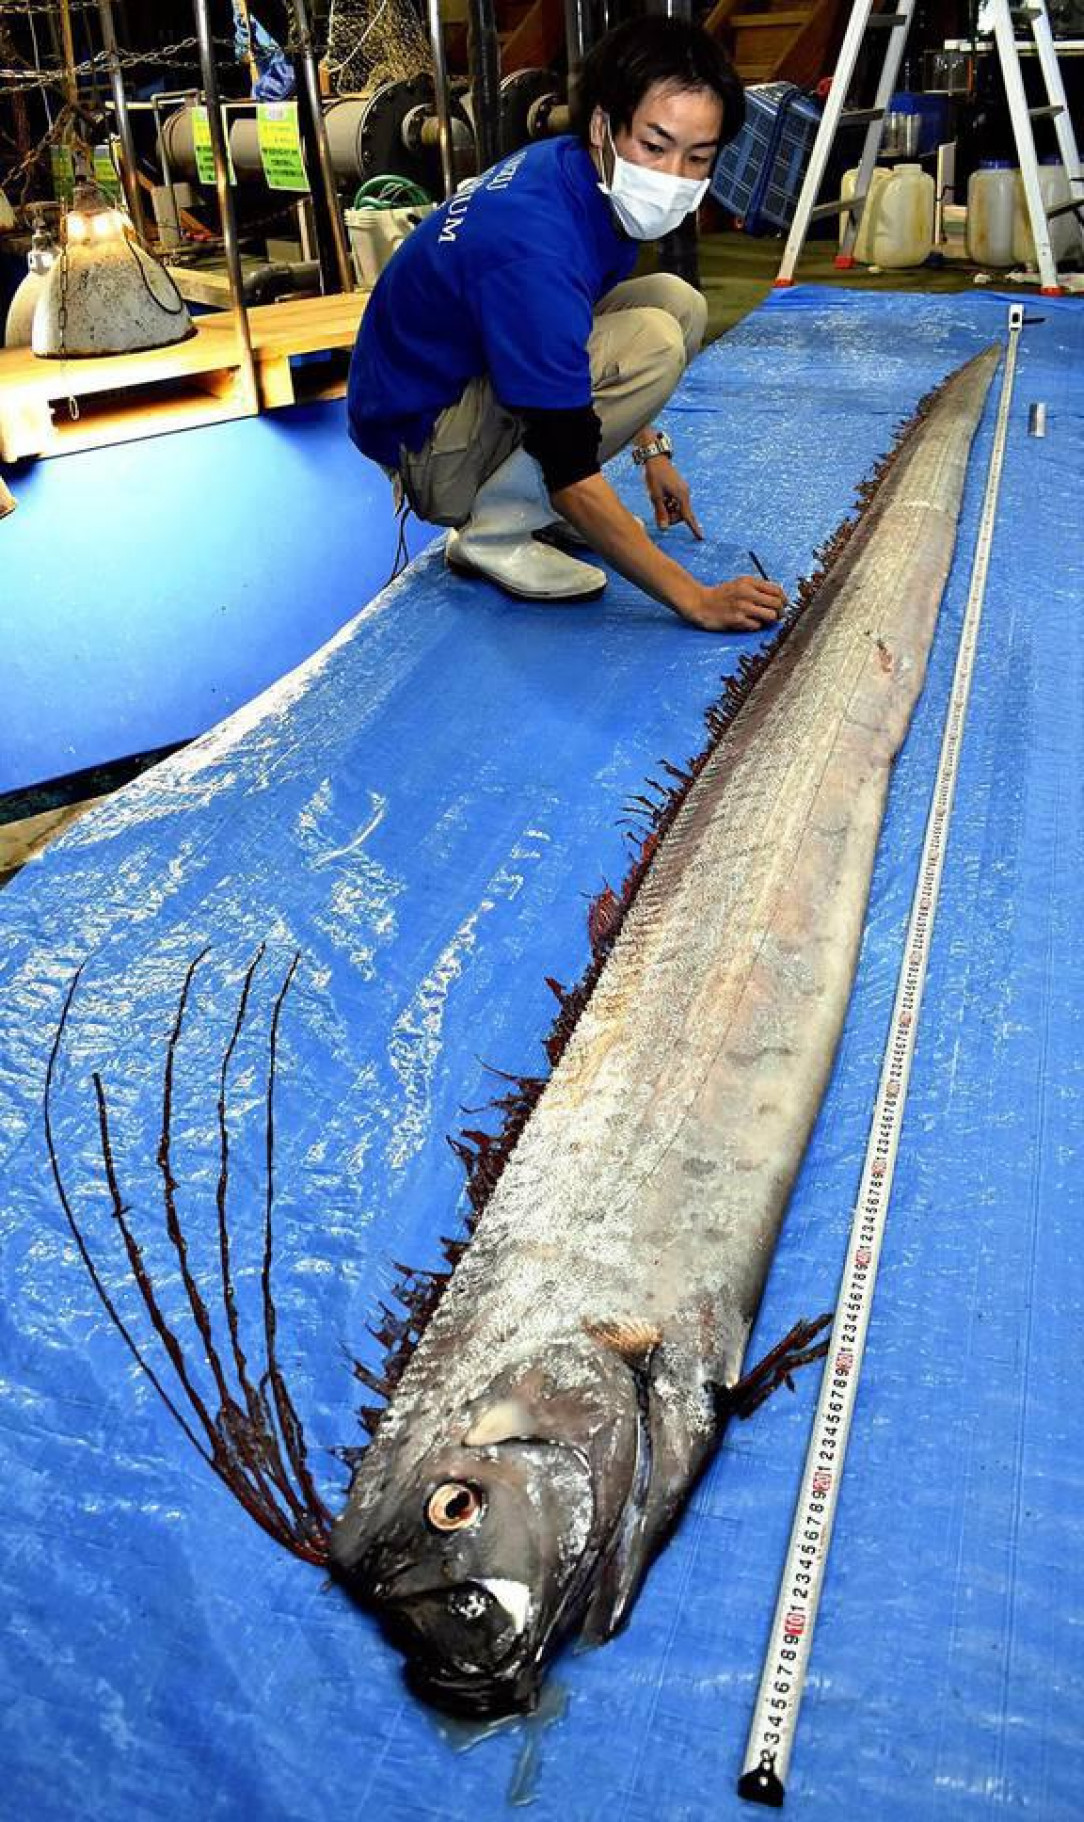 Oarfish are the longest bony fish in the world. They range in 200-1000 meters water, or the mesopelagic zone